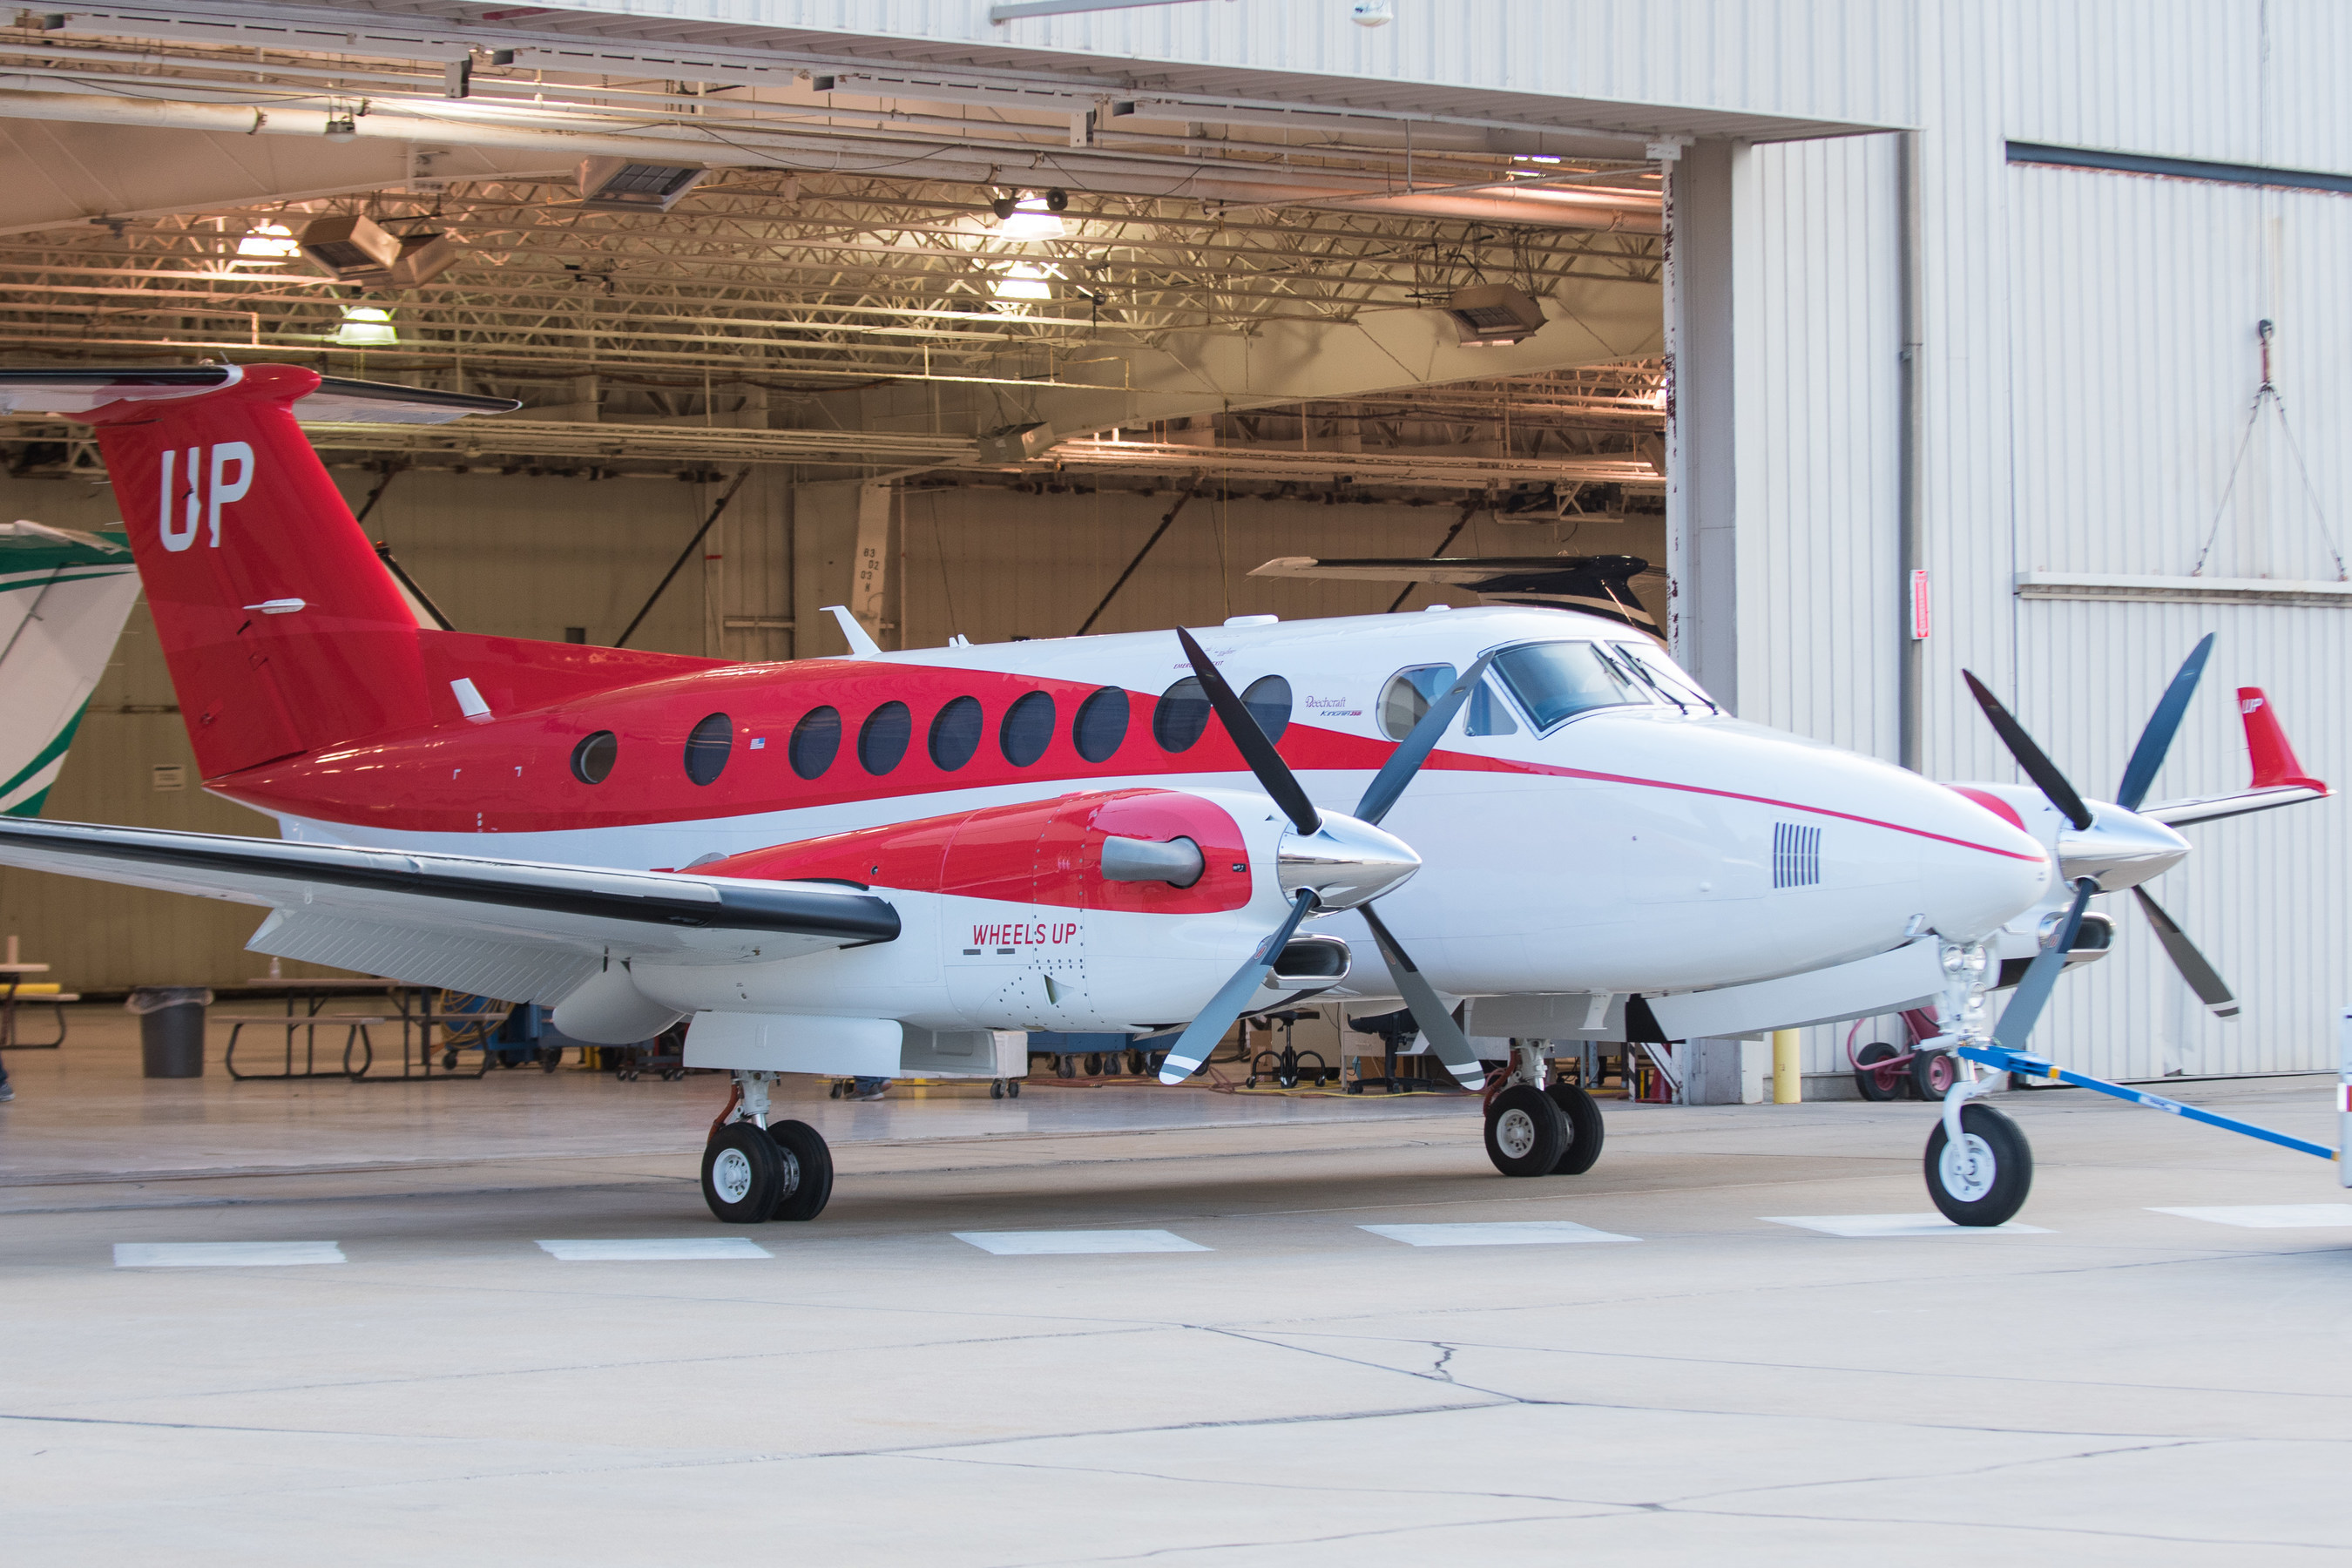 Wheels Up Unveils Red King Air 350i Aircraft During American Heart Month This February 18 To Support The American Heart Association And Simon S Heart